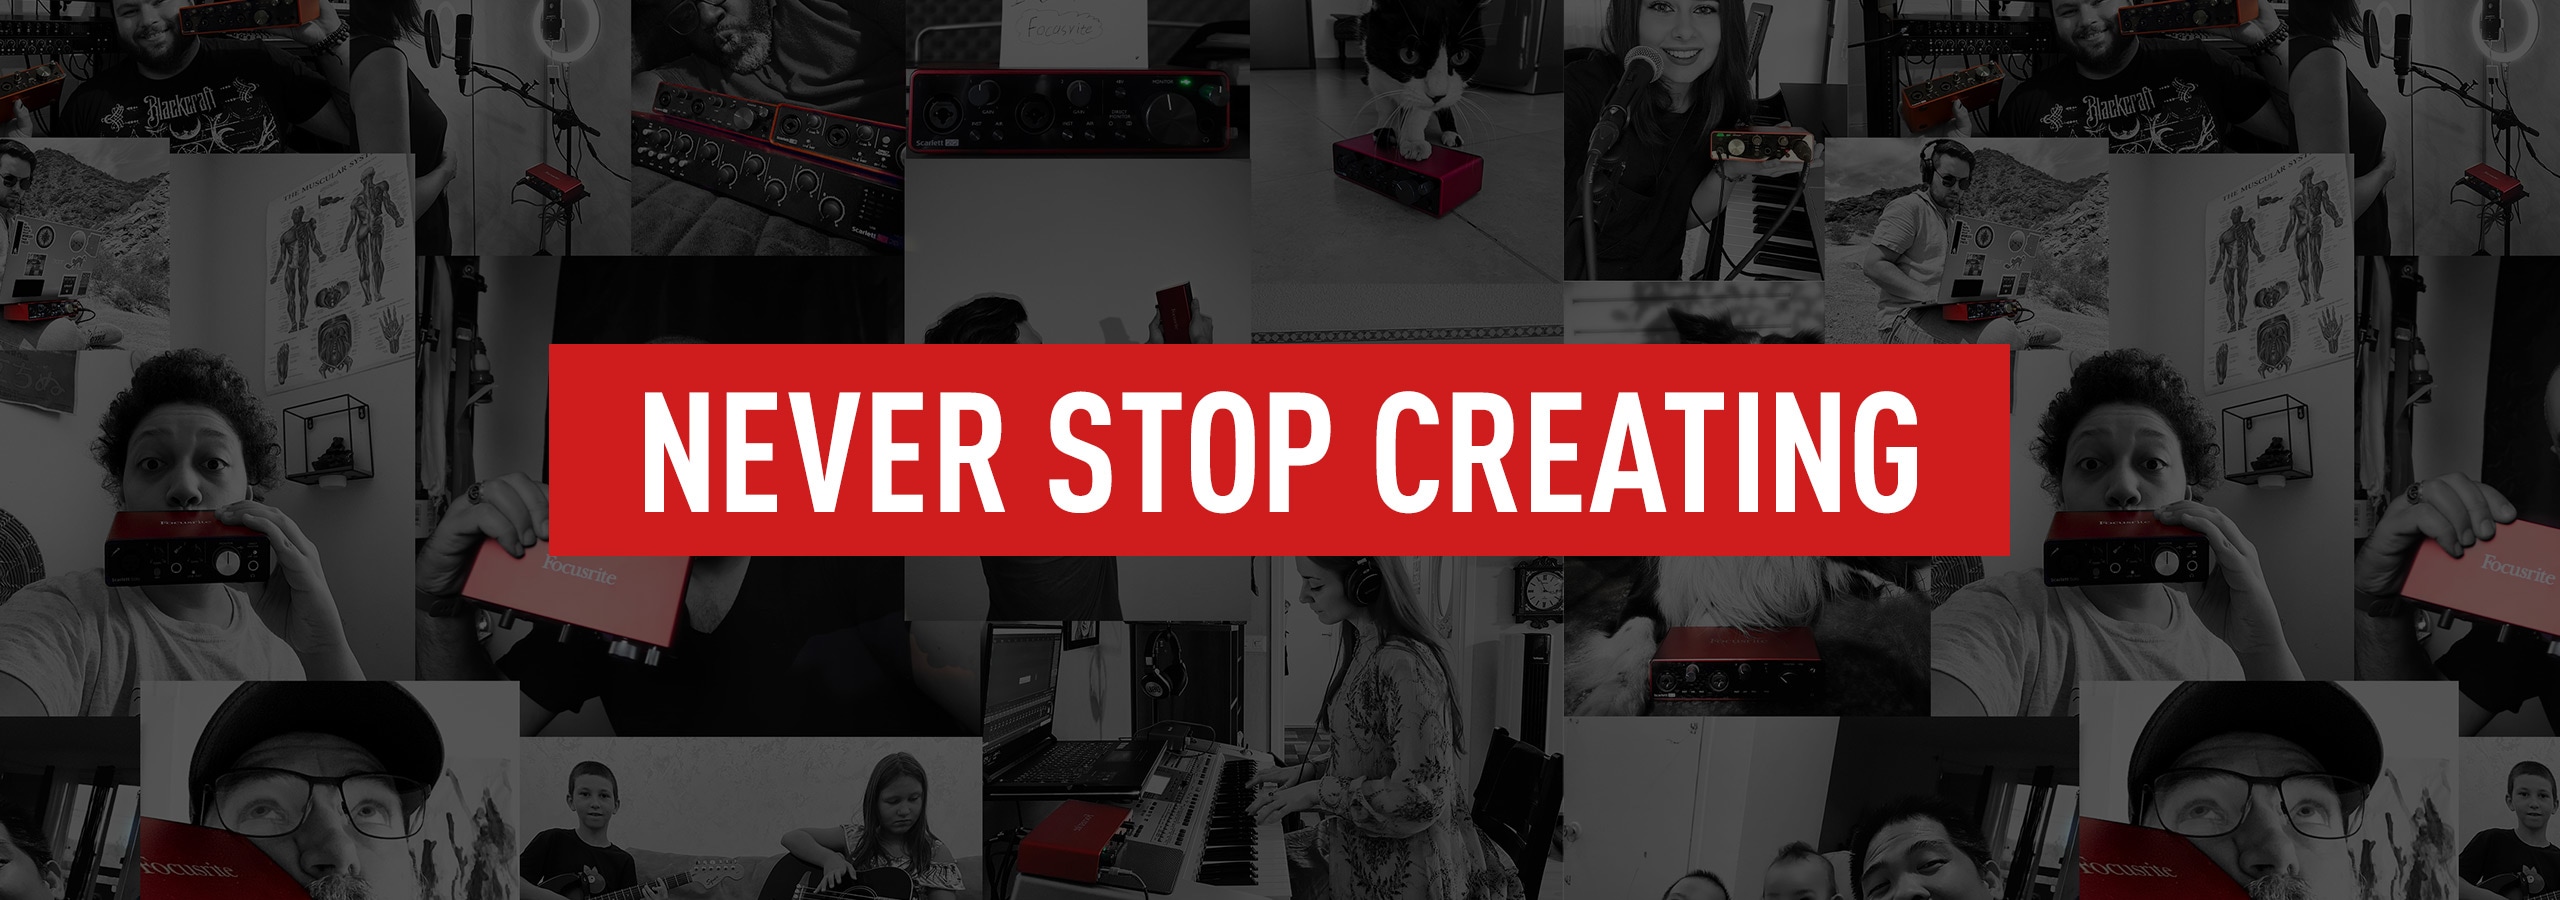 NEVER_STOP_CREATING